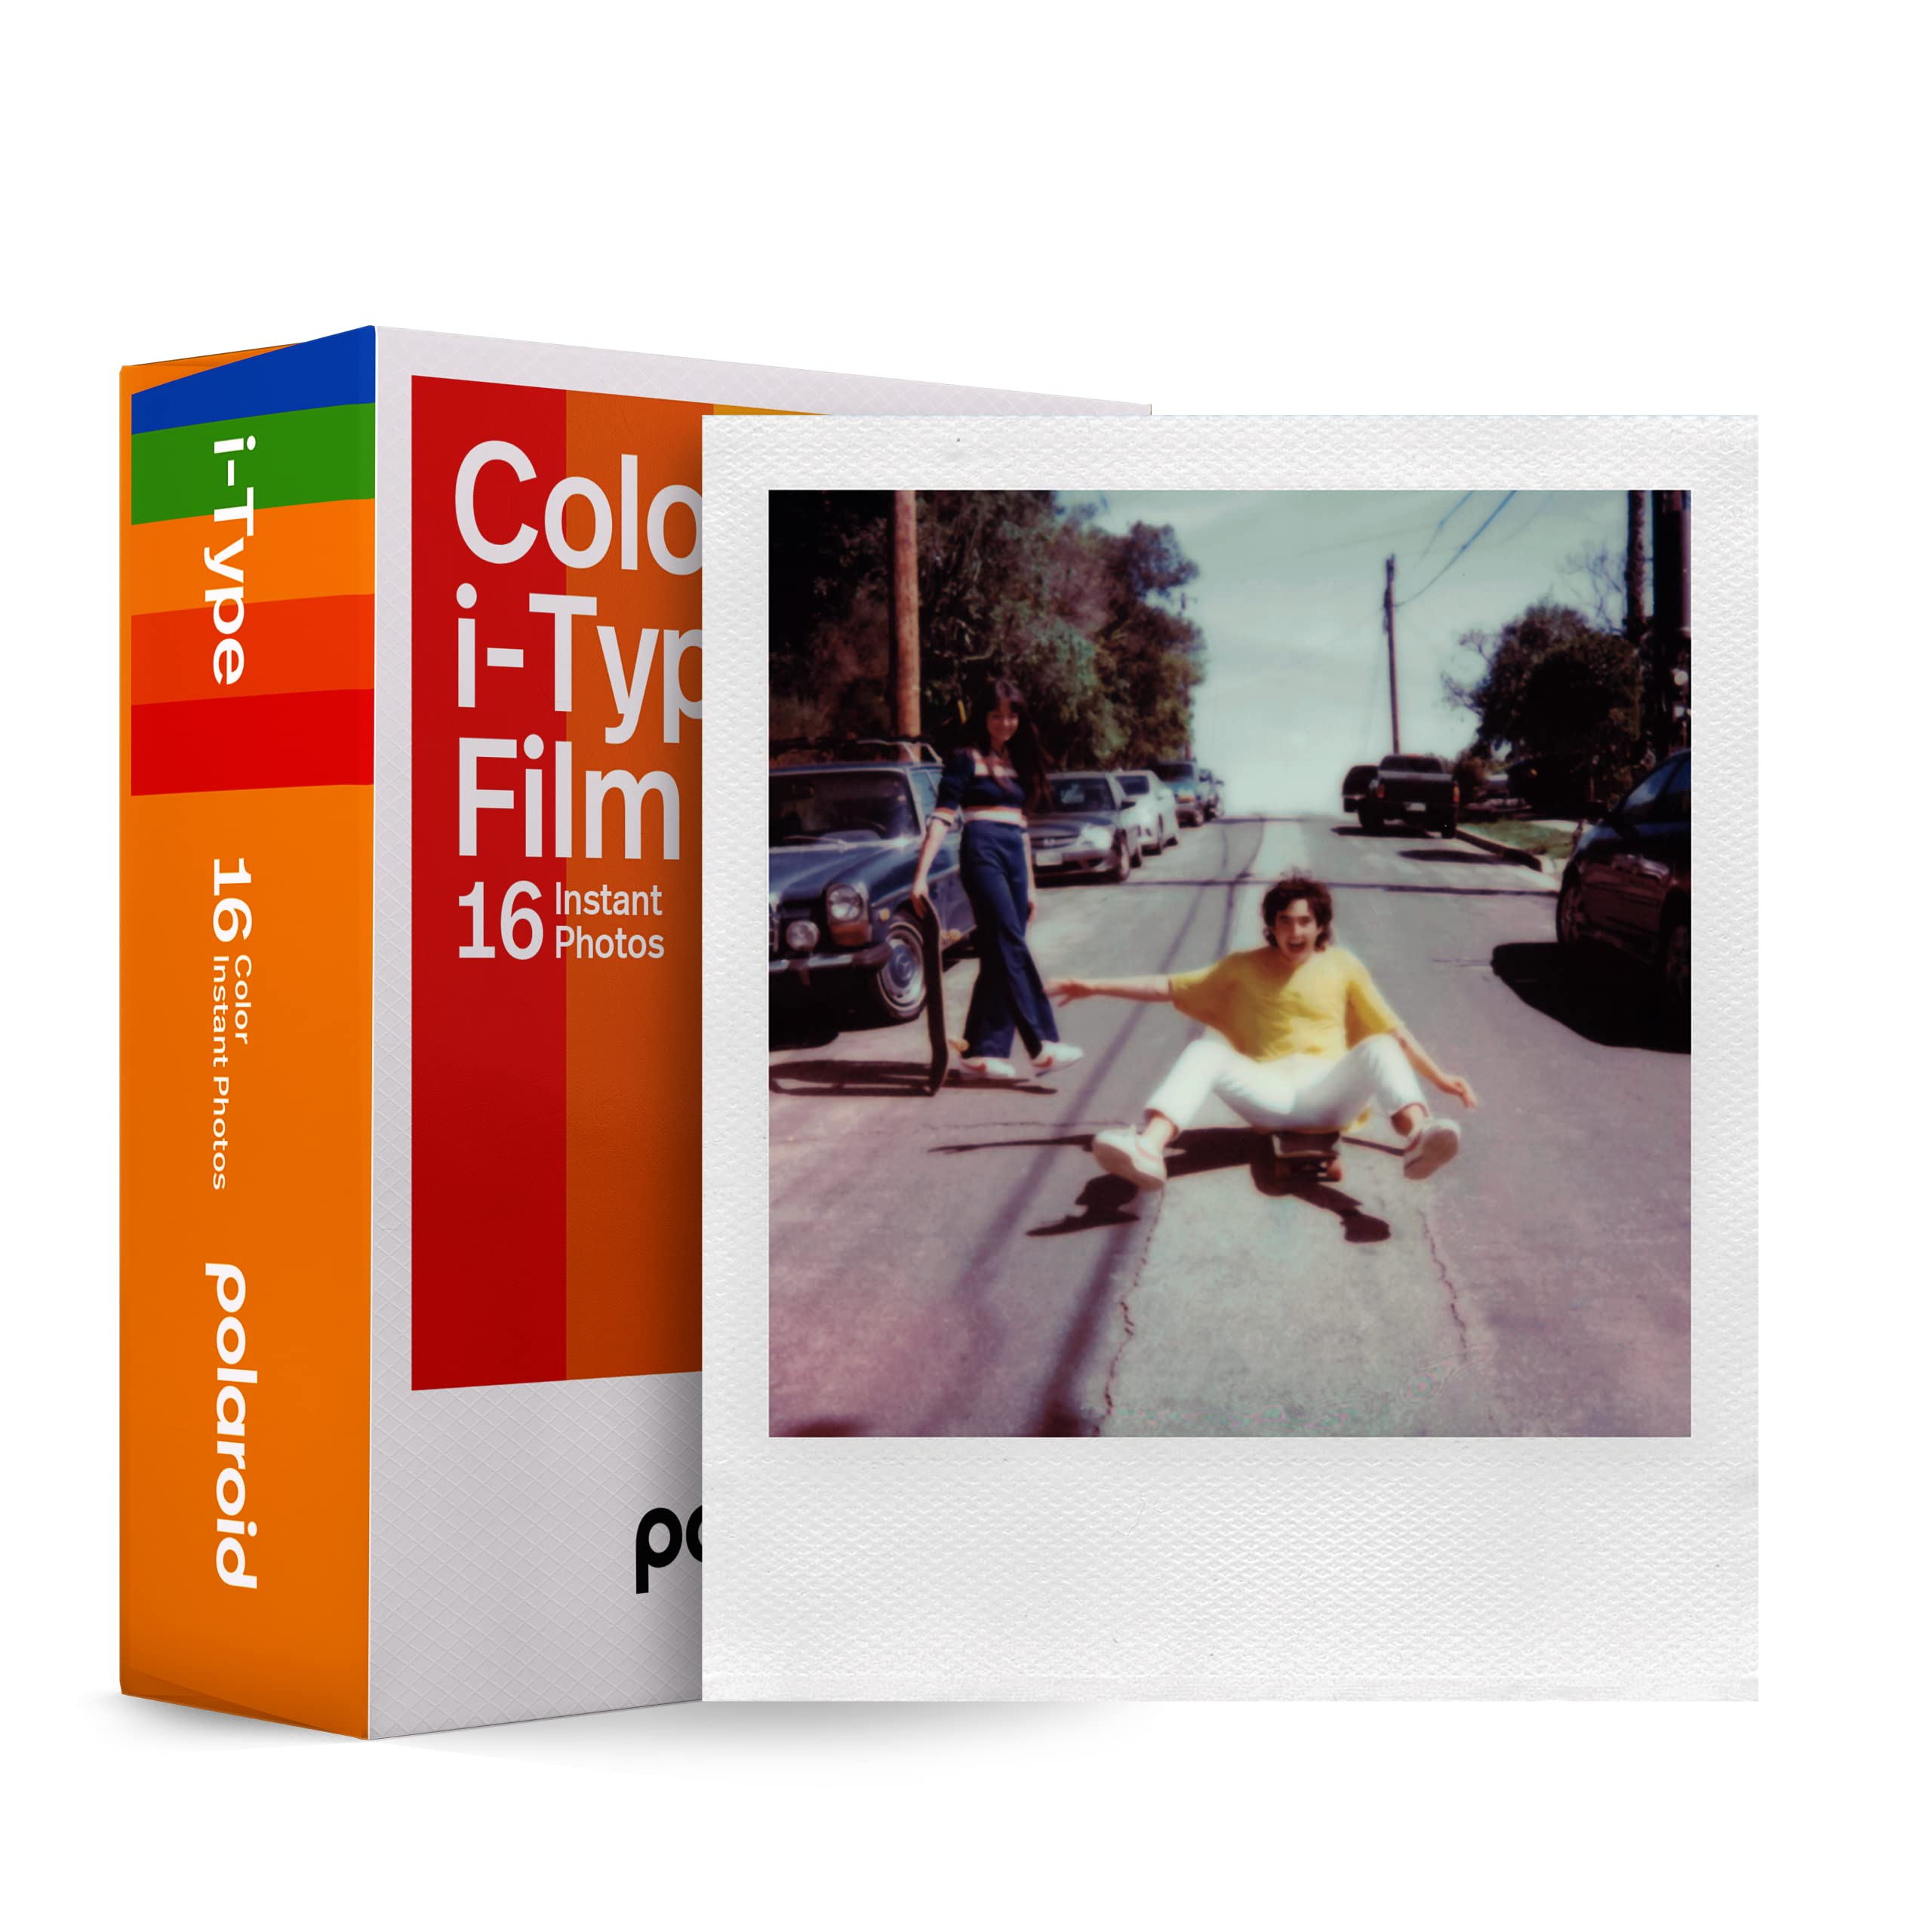 Color i-Type Double Pack Film